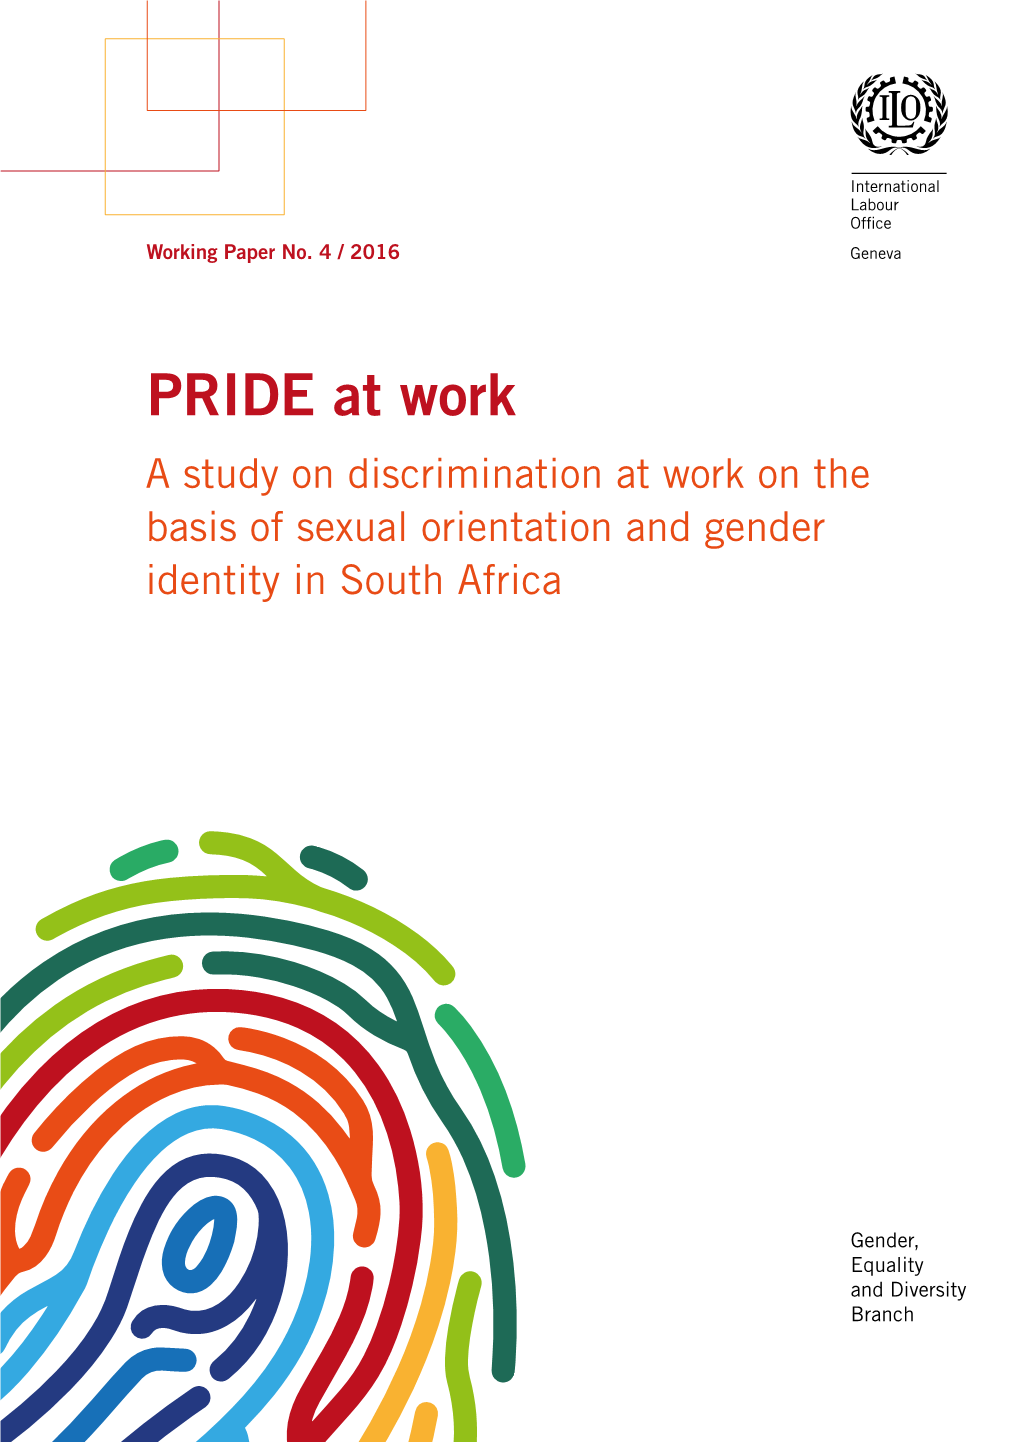 PRIDE at Work a Study on Discrimination at Work on the Basis of Sexual Orientation and Gender Identity in South Africa